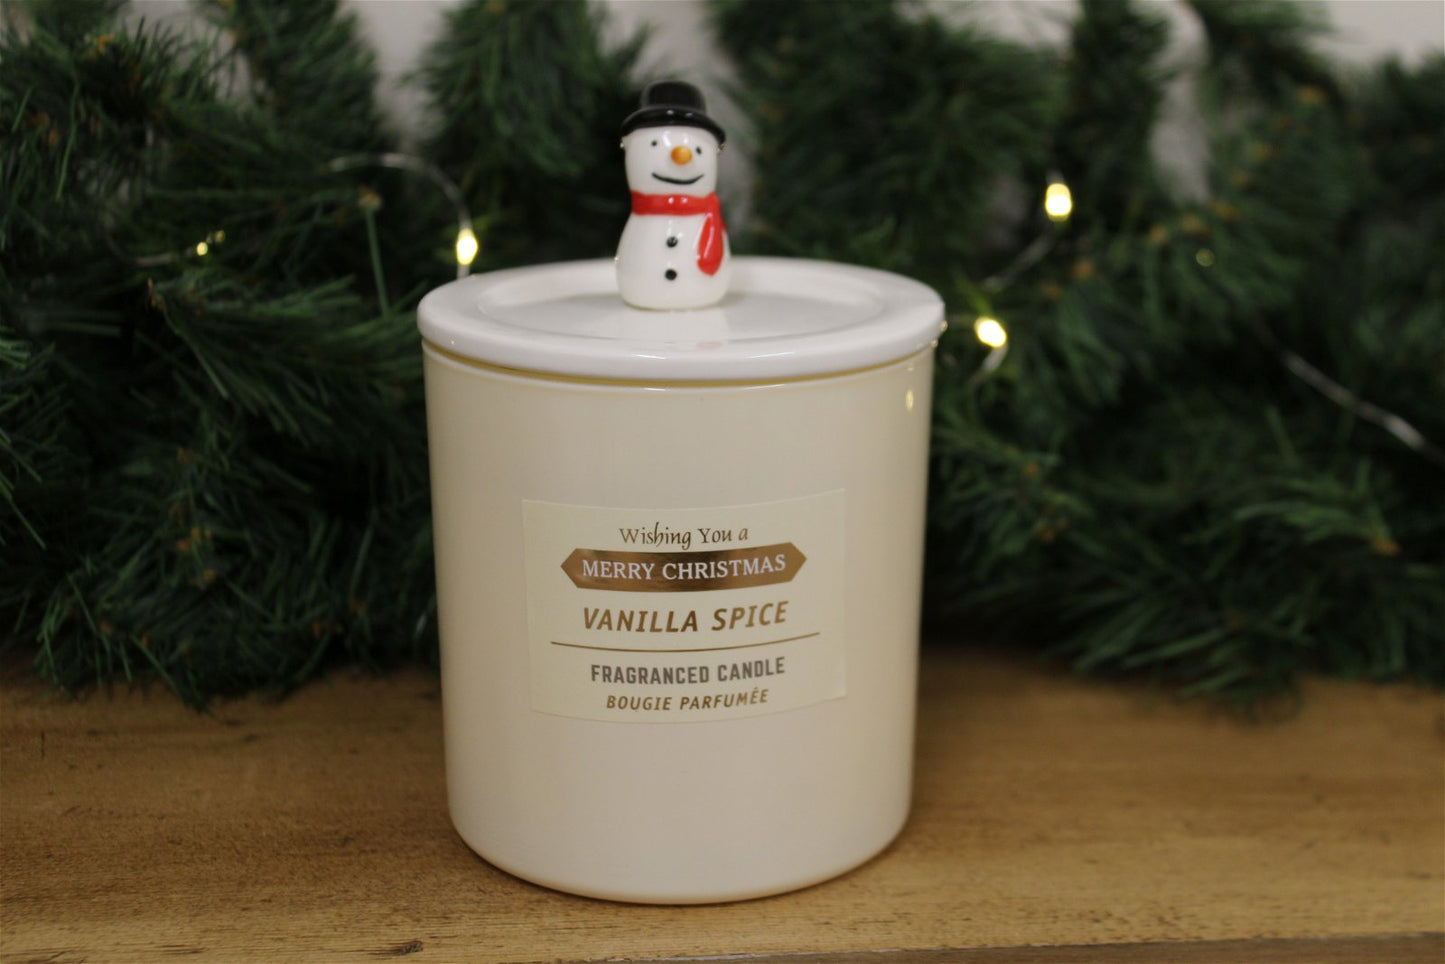 Snowman Character Candle-pot